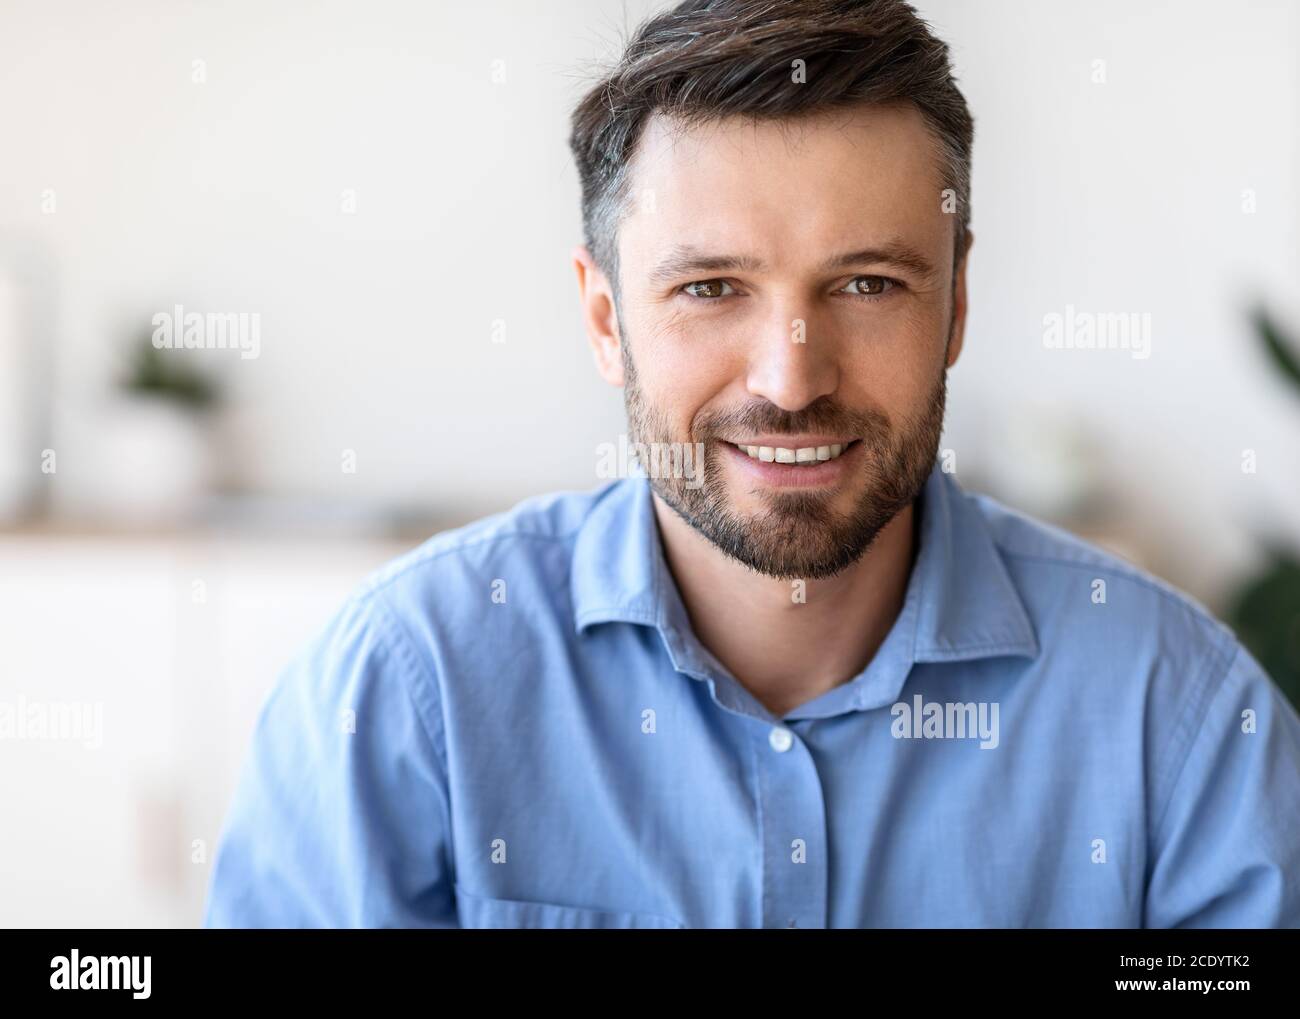 Successful Entrepreneur. Closeup Portrait Of Handsome Young Businessman Smiling At Camera Stock Photo